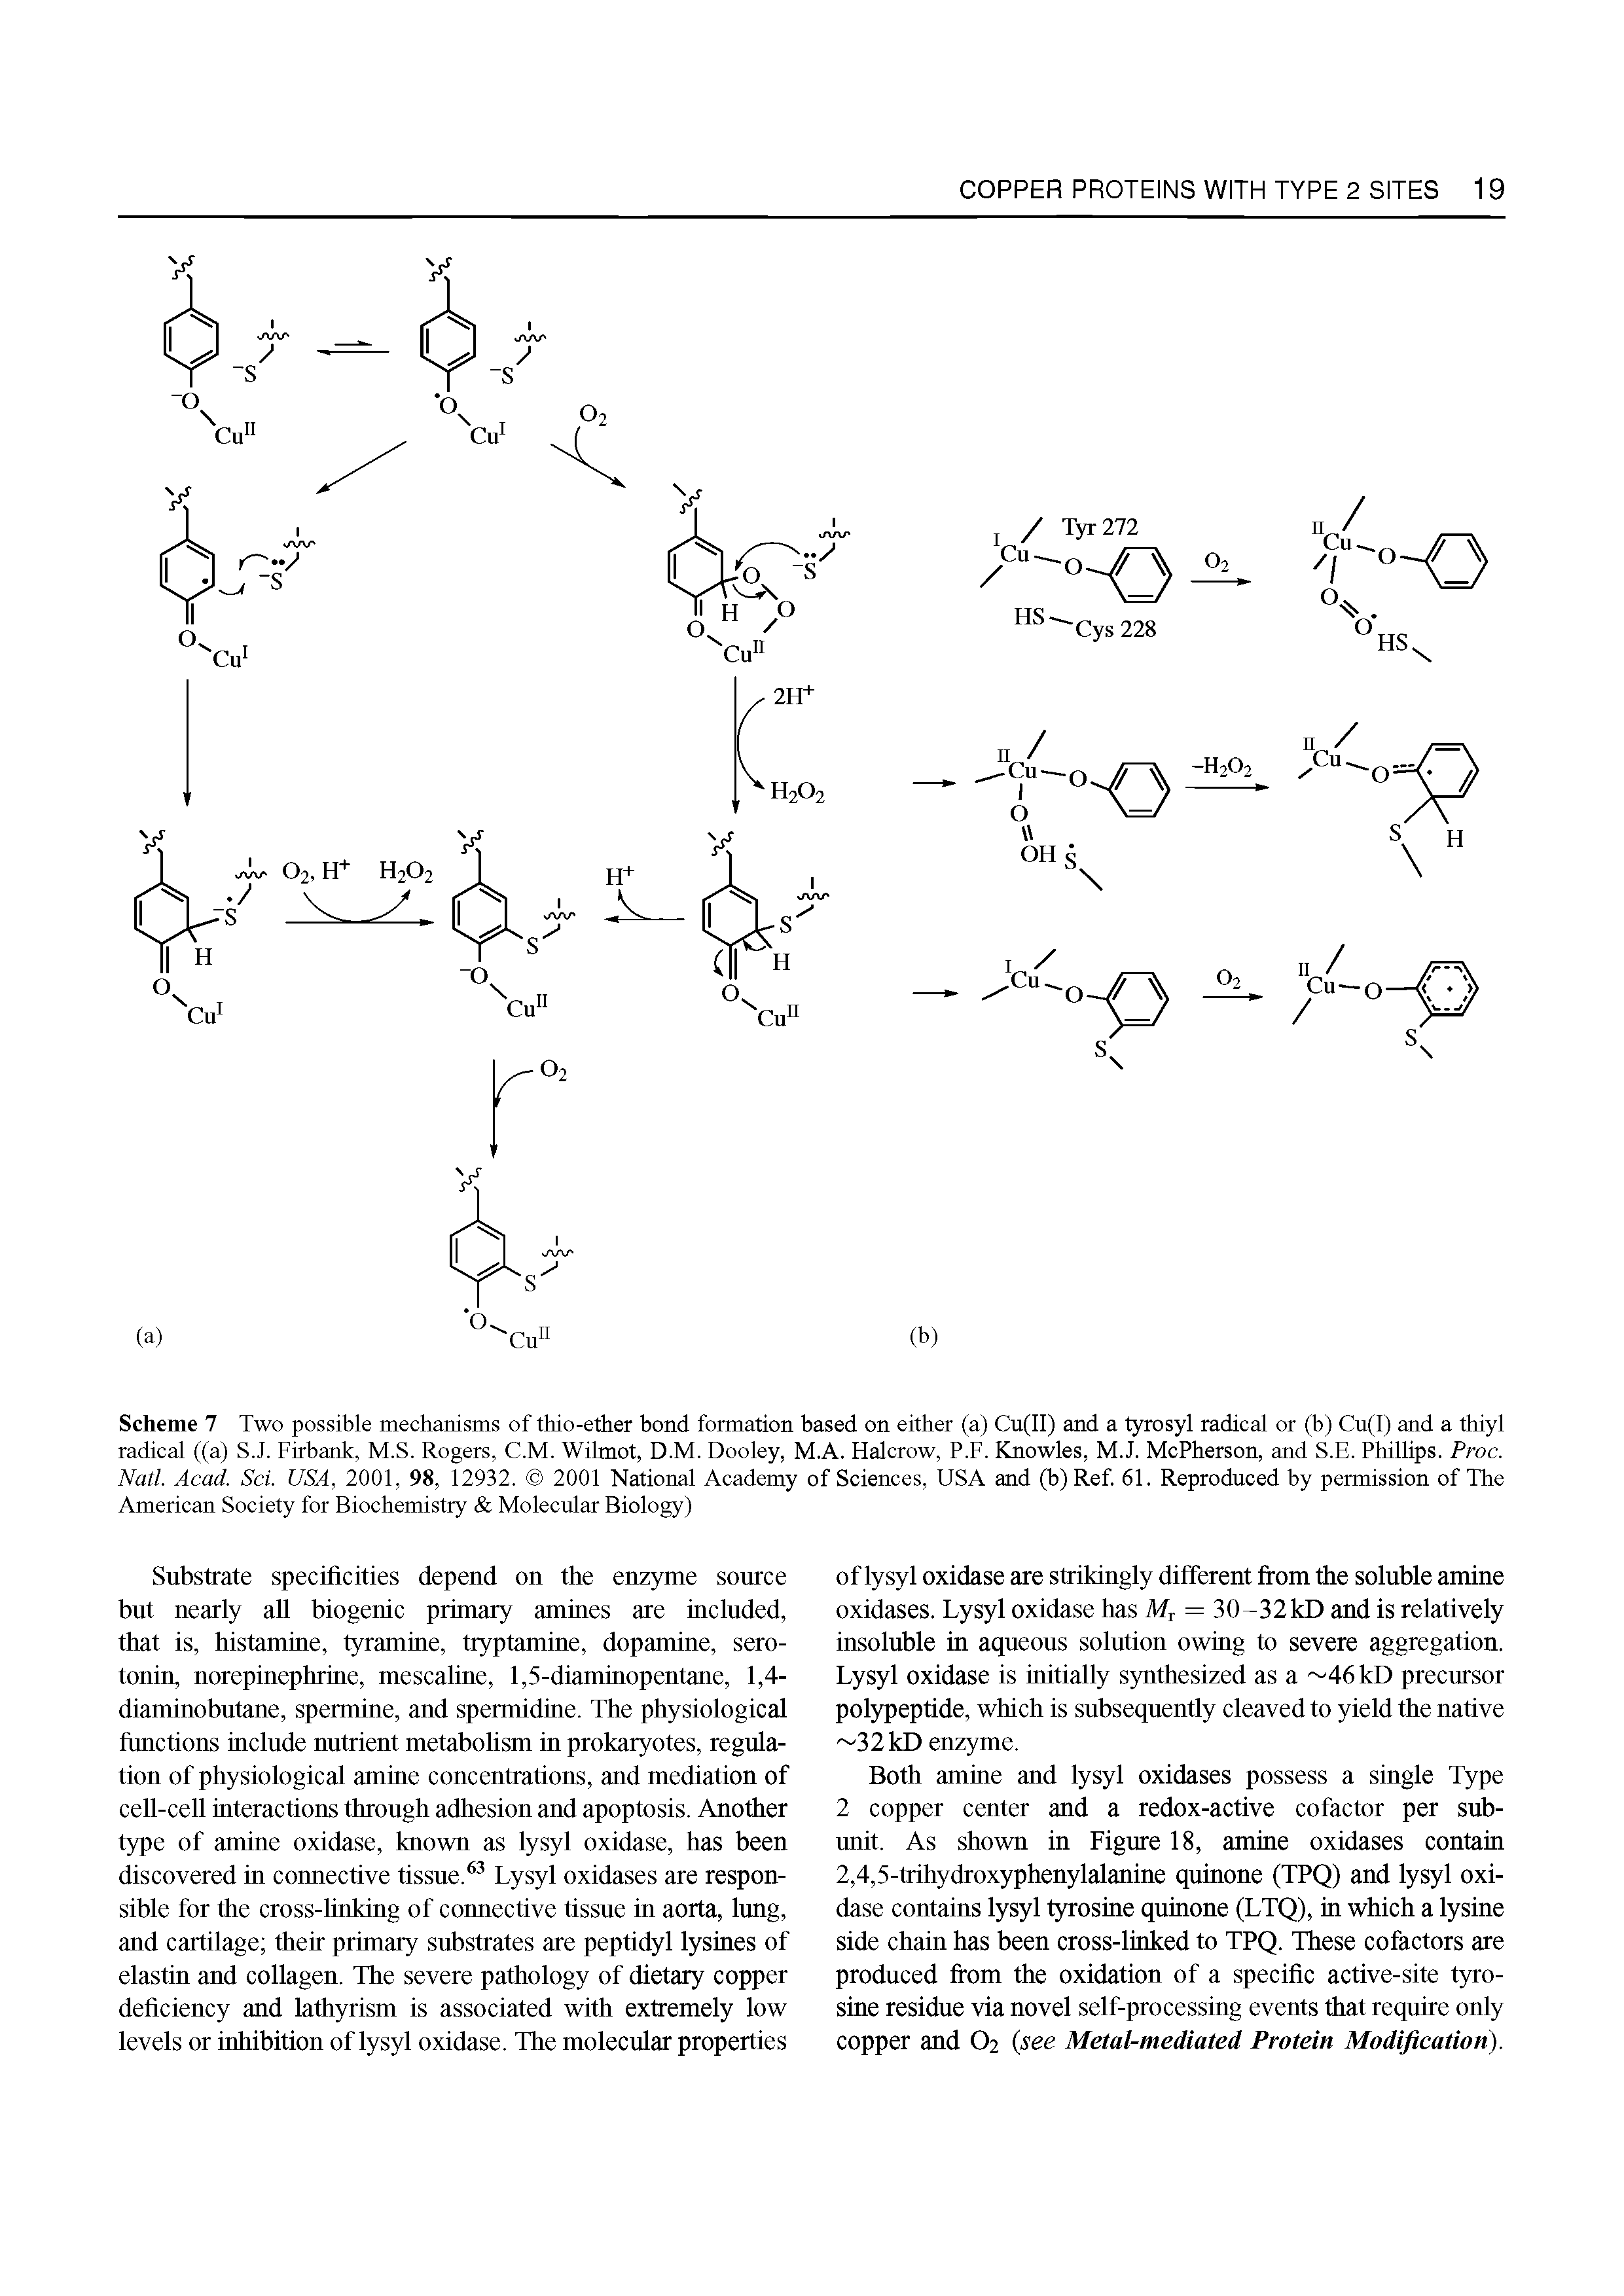 Scheme 7 Two possible mechanisms of thio-ether bond formation based on either (a) Cu(II) and a tyrosyl radical or (b) Cu(l) and a thiyl radical ((a) S.J. Firbank, M.S. Rogers, C.M. Wilmot, D.M. Dooley, M.A. Halcrow, P.F. Knowles, M.J. McPherson, and S.E. Phillips. Proc. Natl. Acad. Sci. USA, 2001, 98, 12932. 2001 National Academy of Sciences, USA and (b) Ref. 61. Reproduced by permission of The American Society for Biochemistry Molecular Biology)...